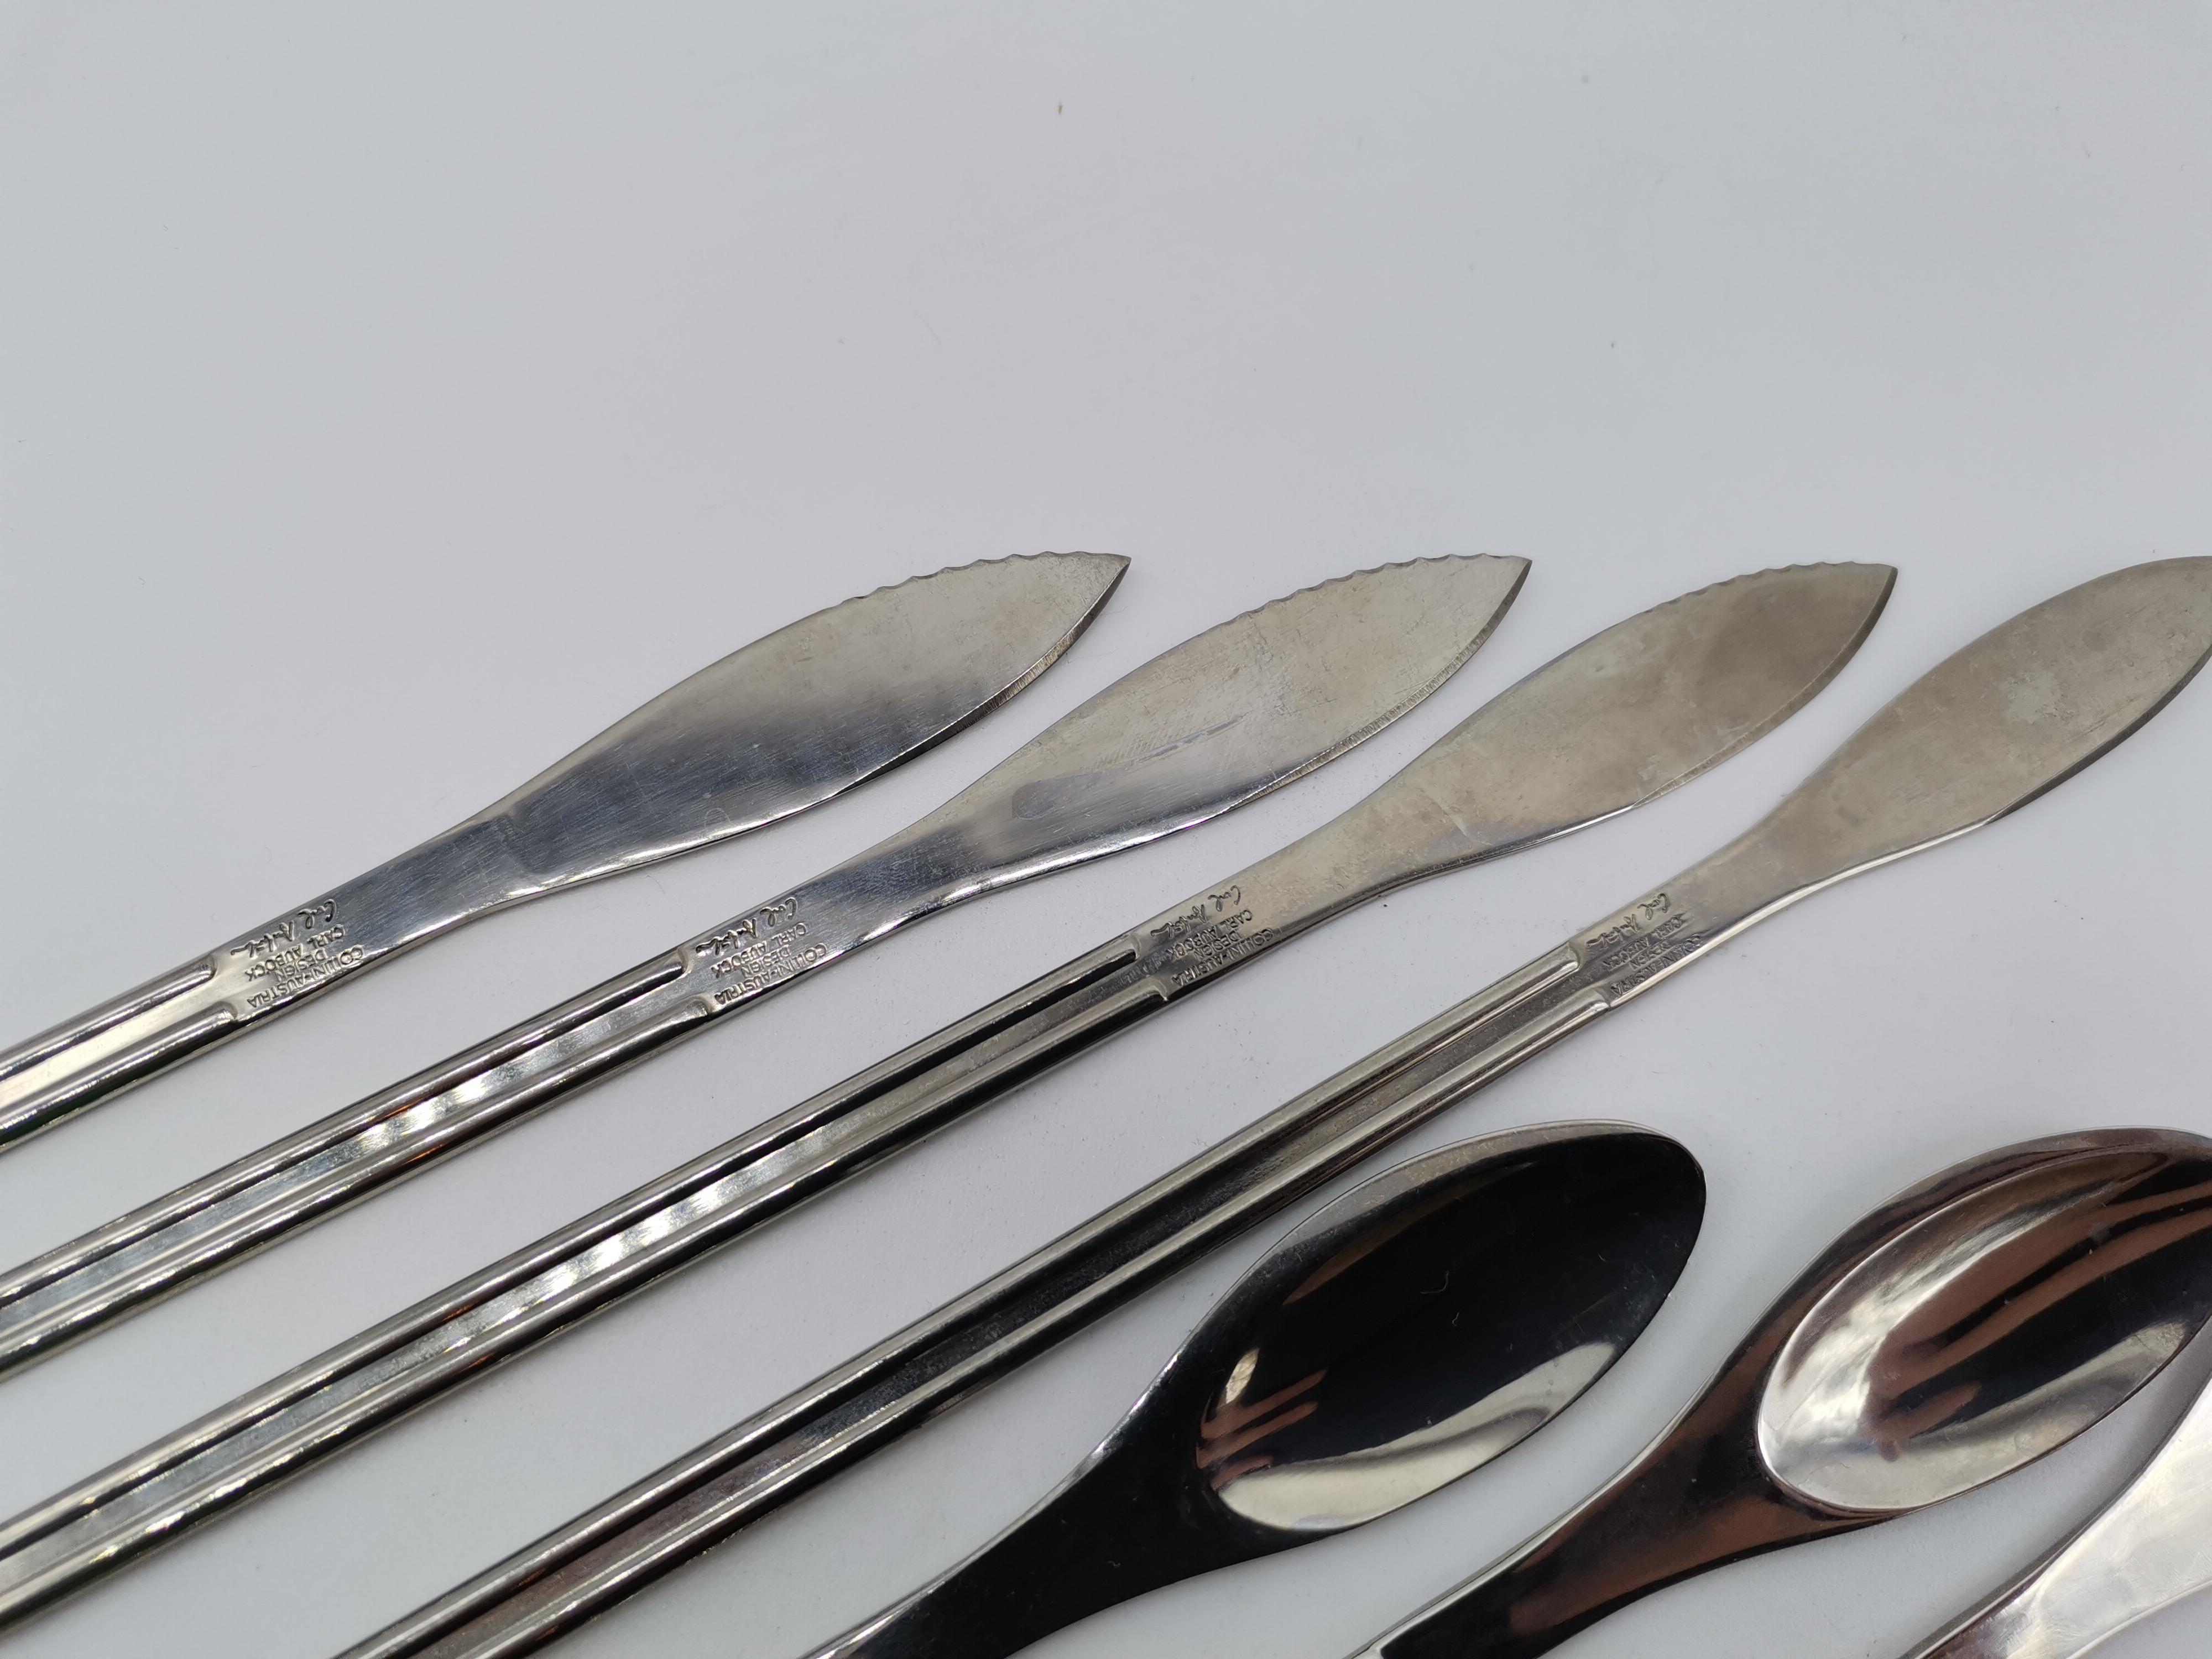 12 pieces of dining cutlery by Carl Auböck. Containing 4 forks, 4 knives, and 4 spoons.